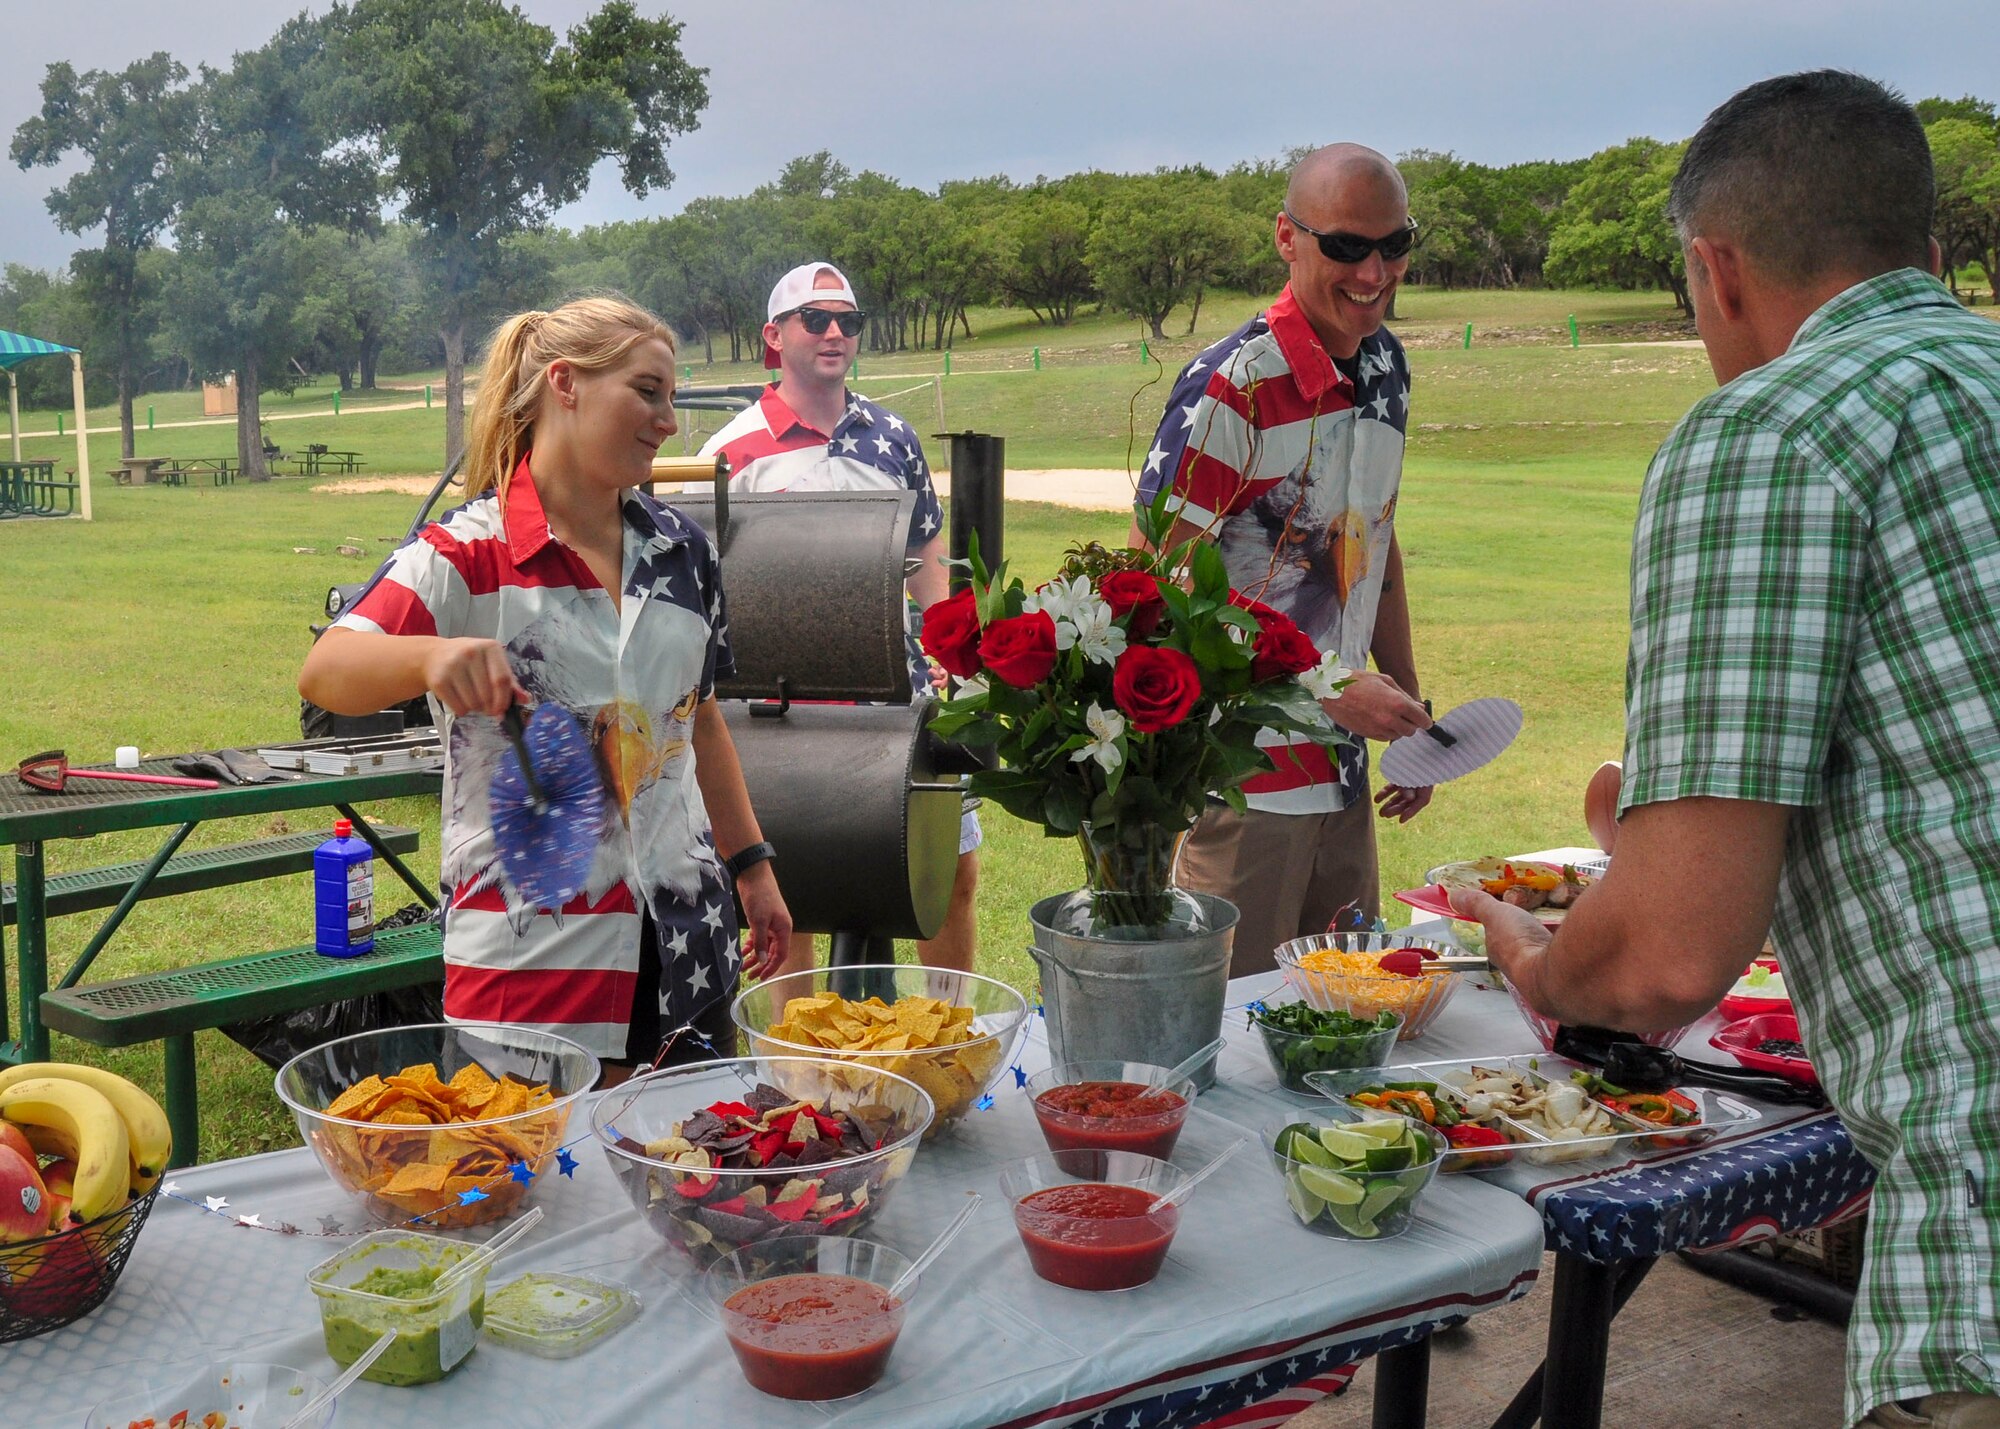 The 502nd Air Base Wing’s command section enjoy lunch during their resiliency day at Canyon Lake June 11, 2019. For the 502nd ABW command staff function, the UNITE program provided funding for the food, $5 per member.